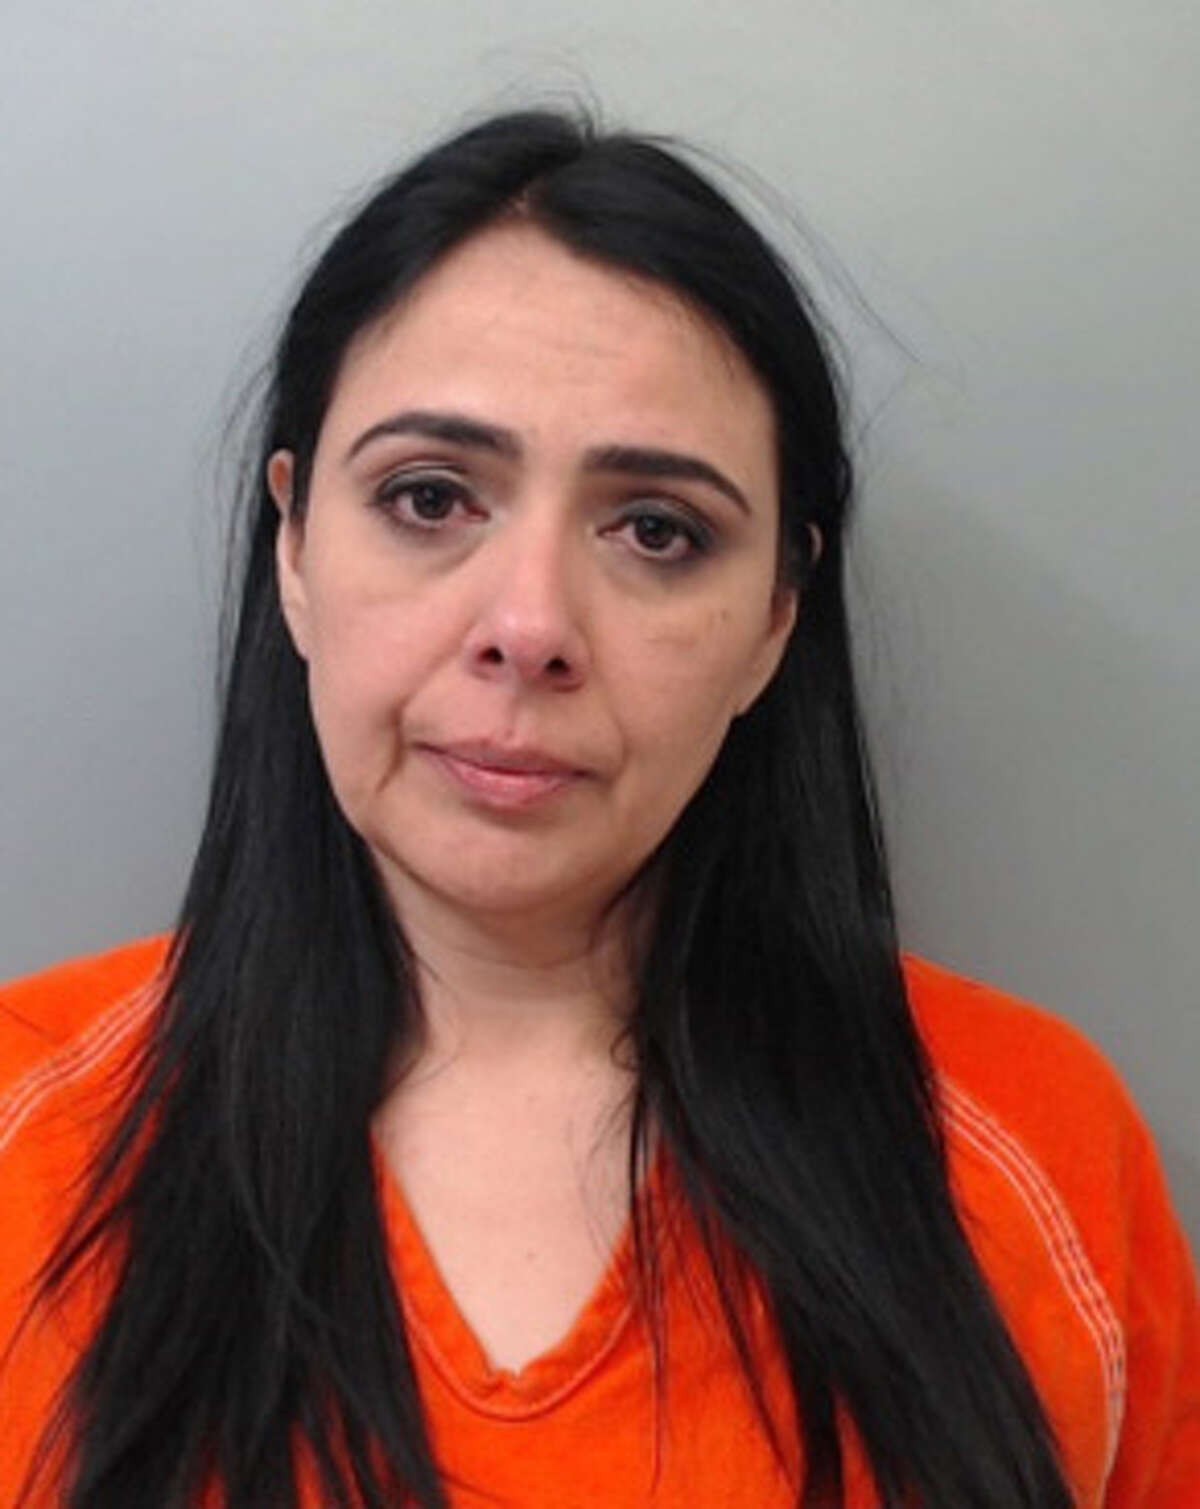 Claudia Gonzalez, 45, was charged with evading arrest with a vehicle.